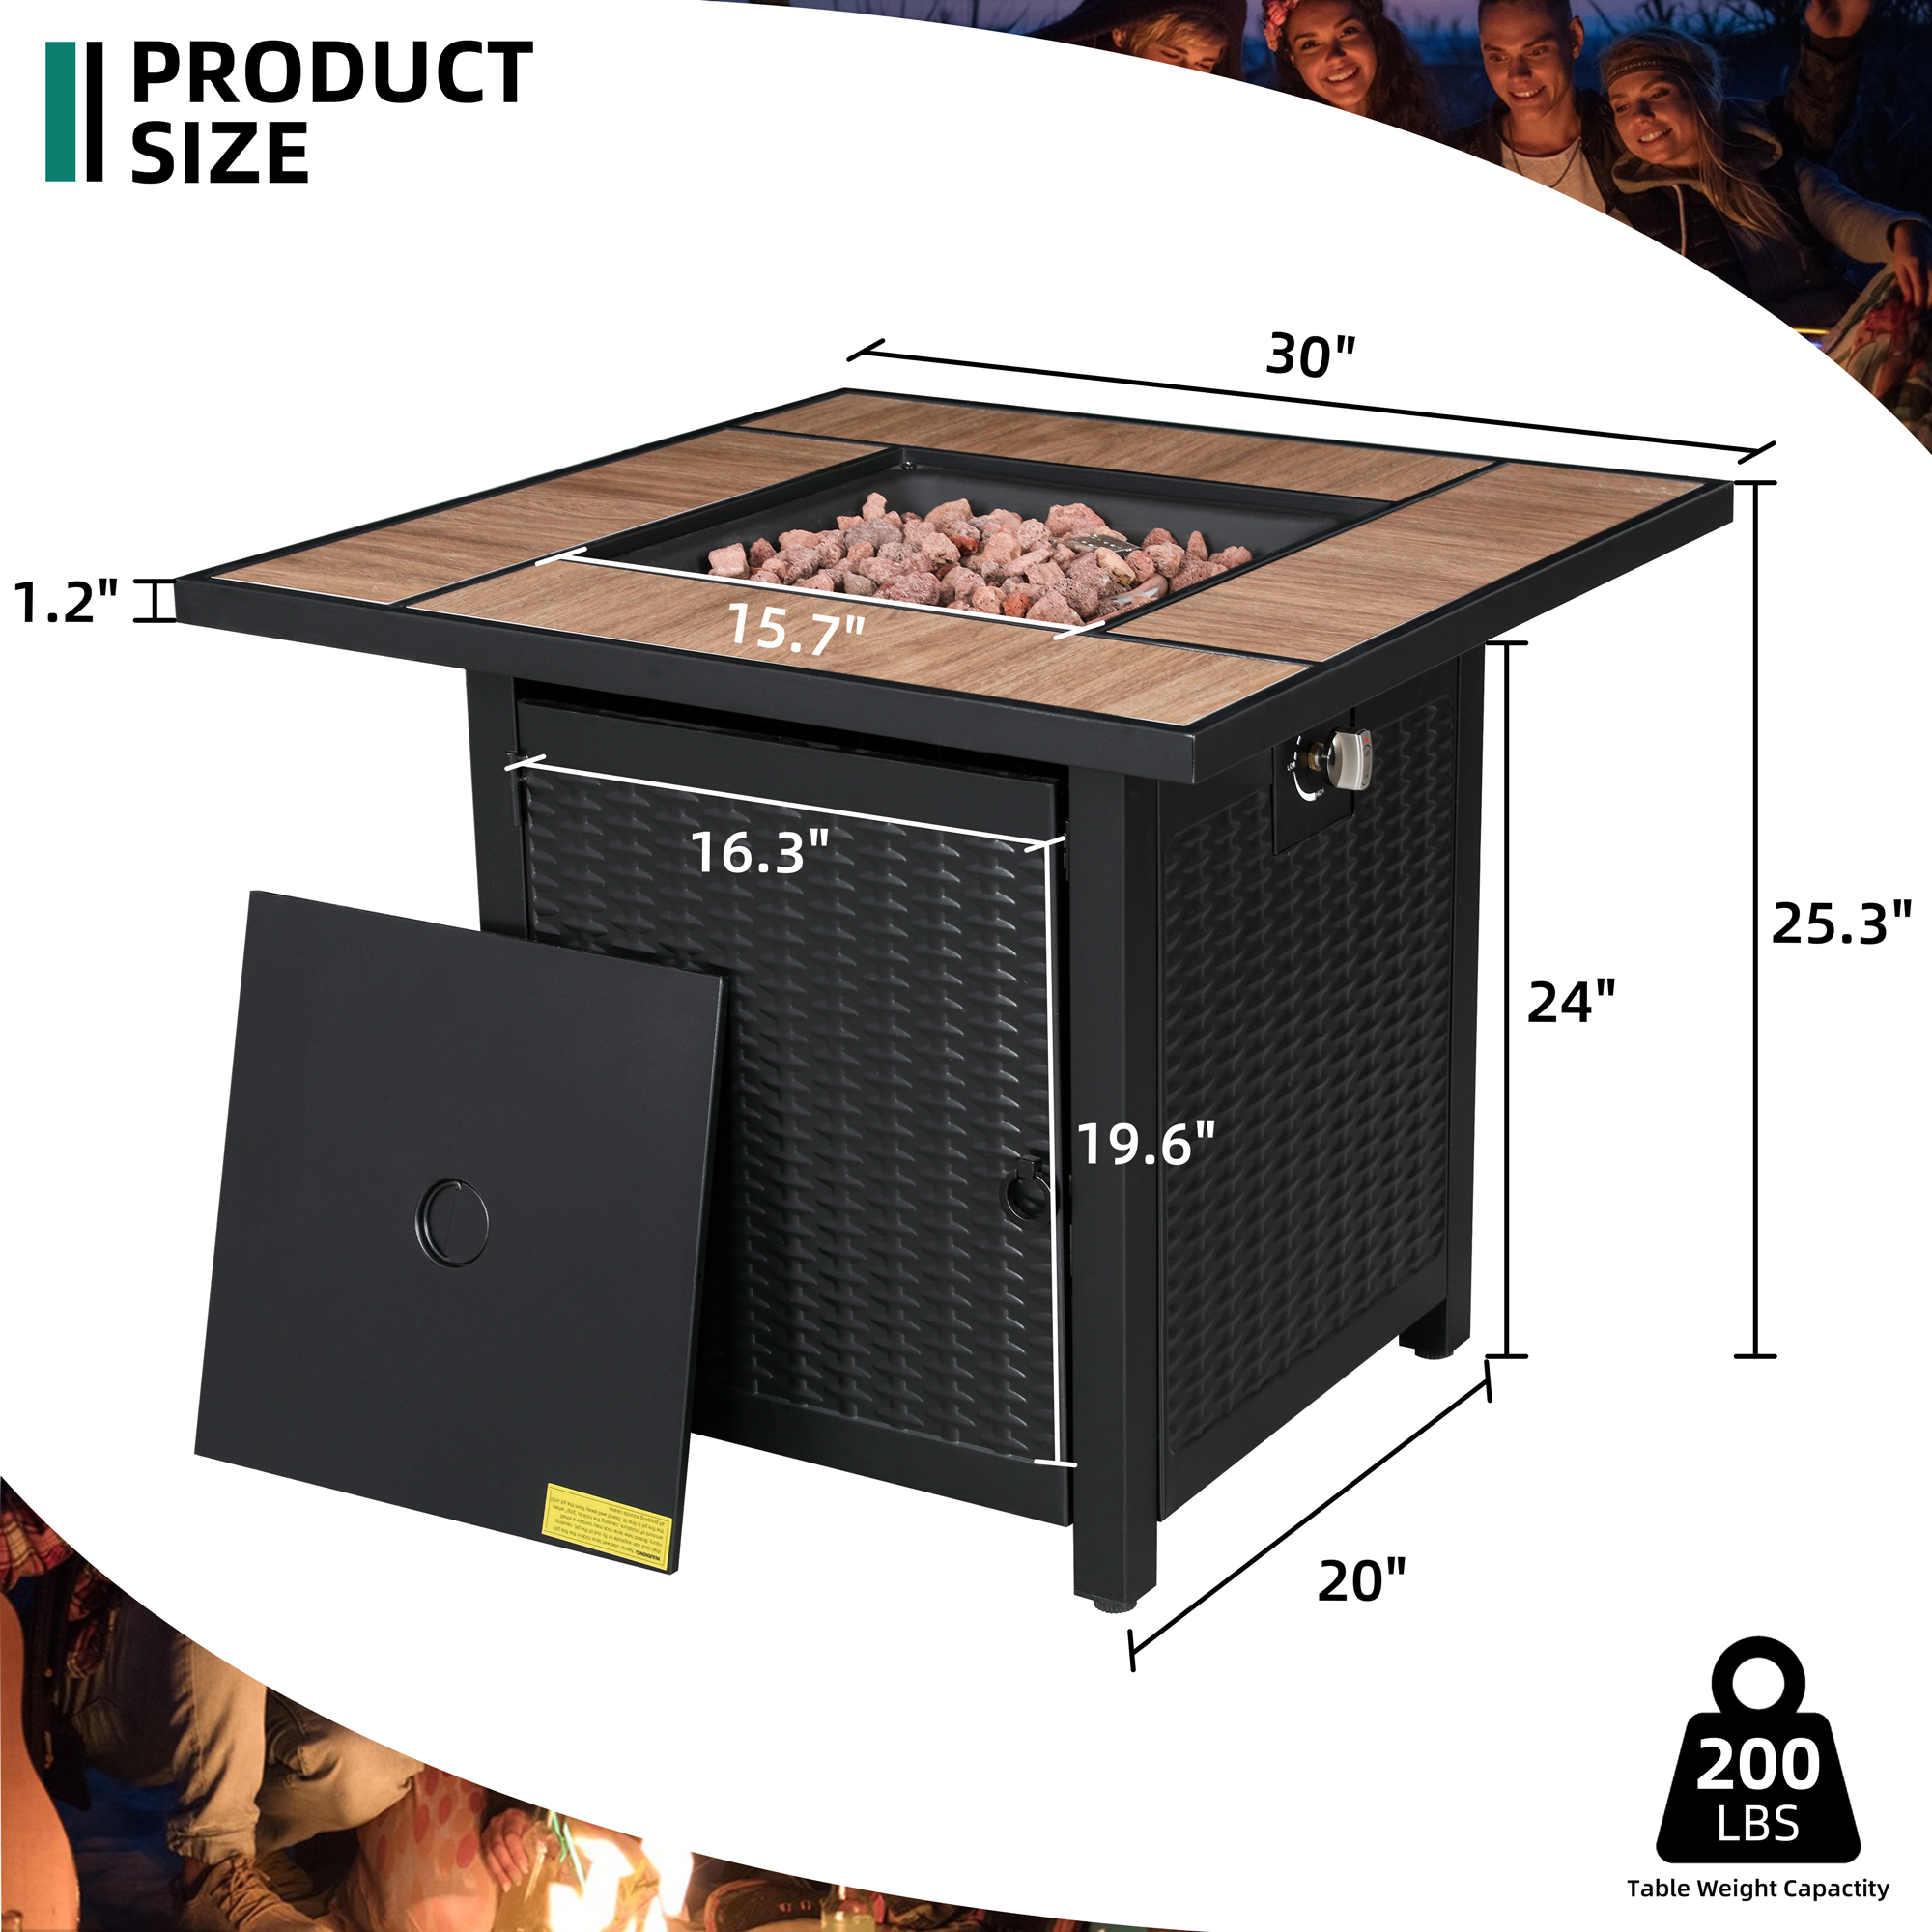 Walsunny 30" Propane Gas Fire Pit Table 50,000 BTU Square Outdoor Wicker Walnut Wood - image 5 of 9